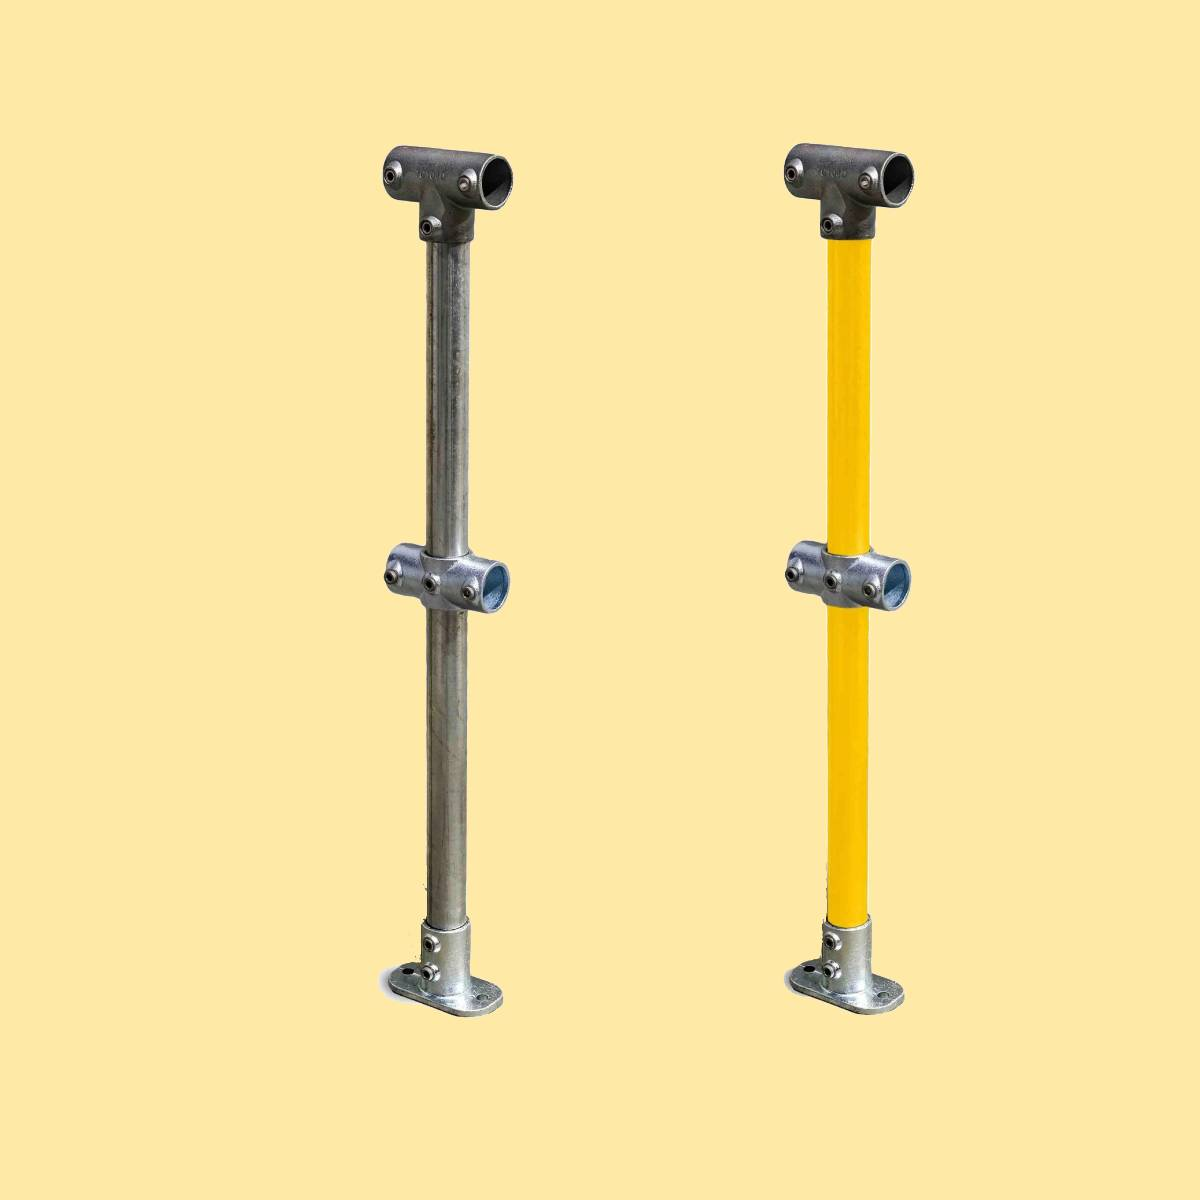 Cope Modular Stanchions